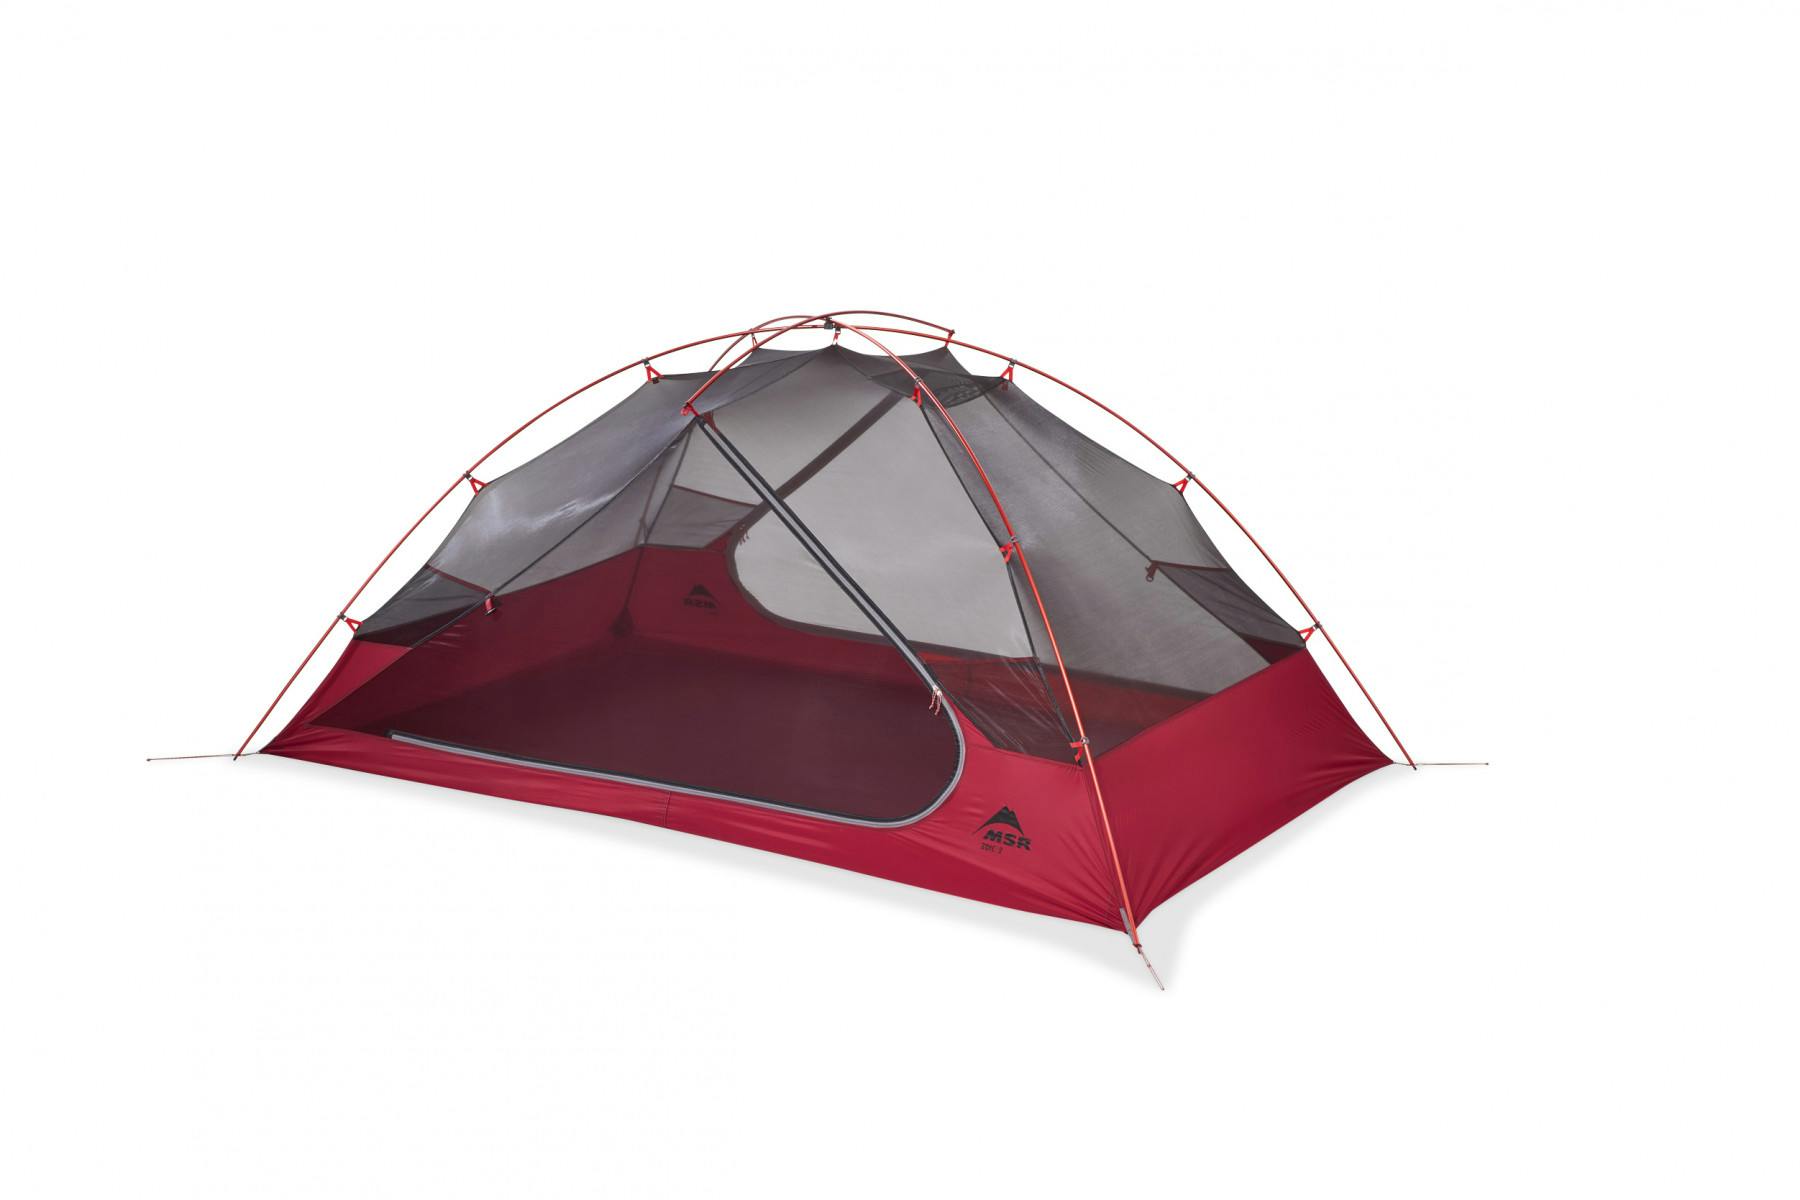 MSR Zoic 2 Person Tent · Gray/Red